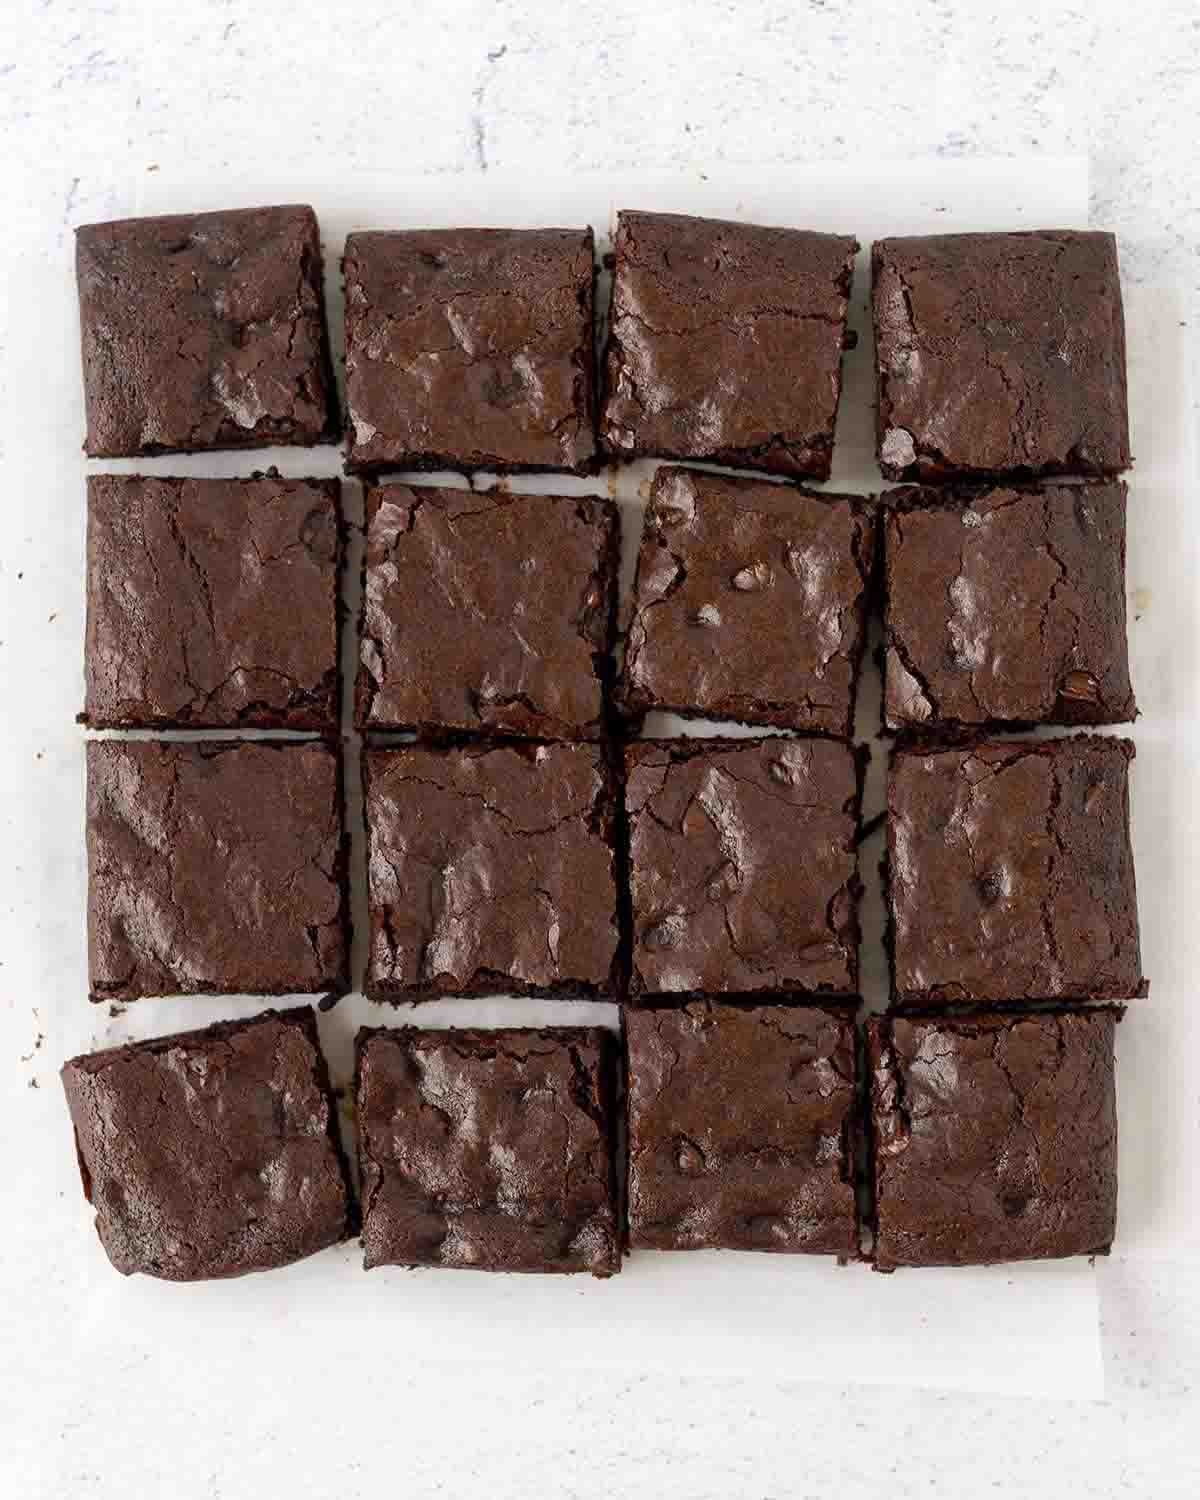 An overhead shot showing gf brownies sliced into squares.